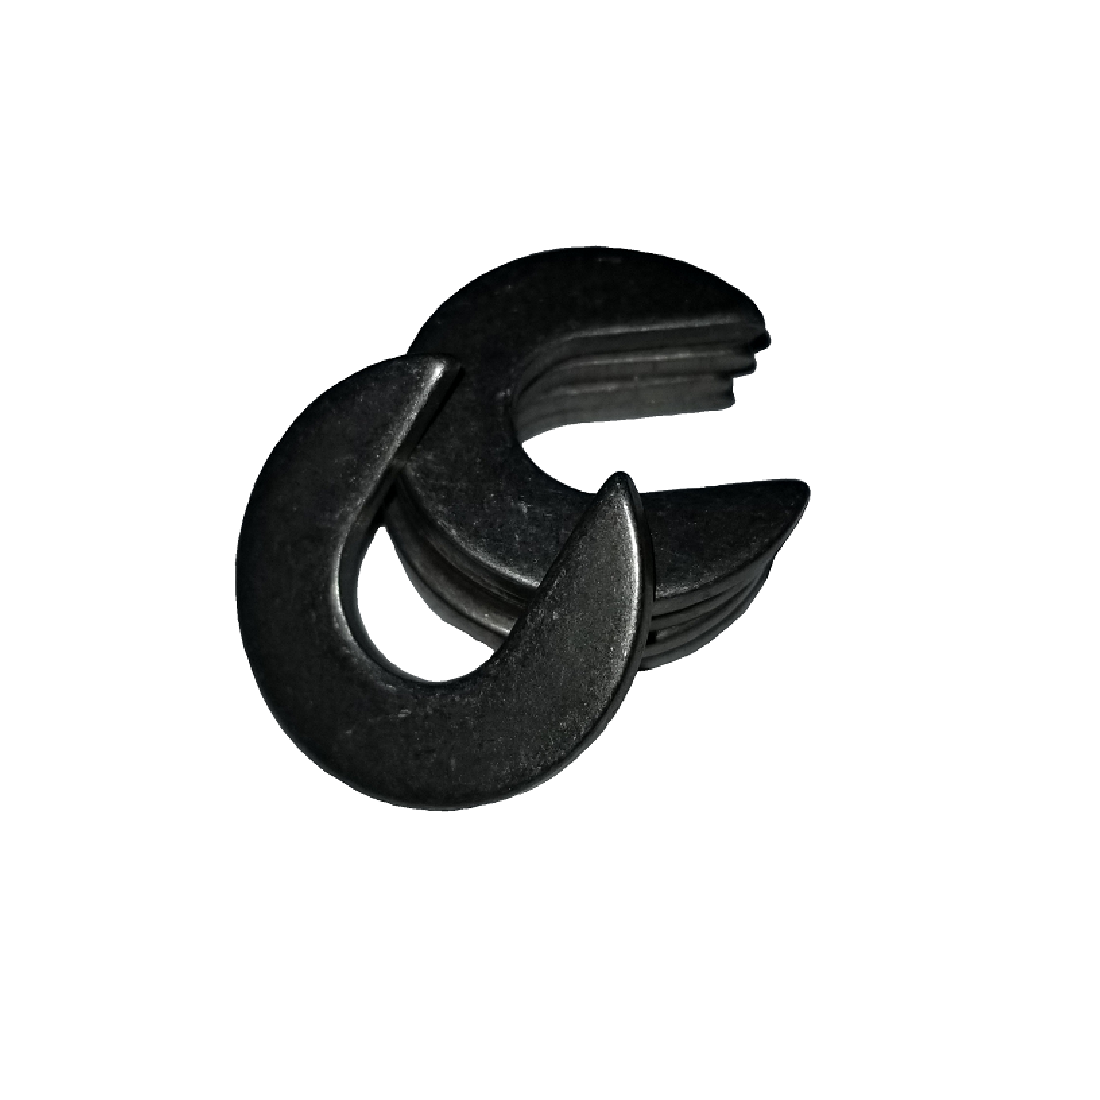 Slotted Washer - 1.125 ID, 4.000 OD, 0.120 Thick, Low Carbon Steel - Soft, Black Oxide